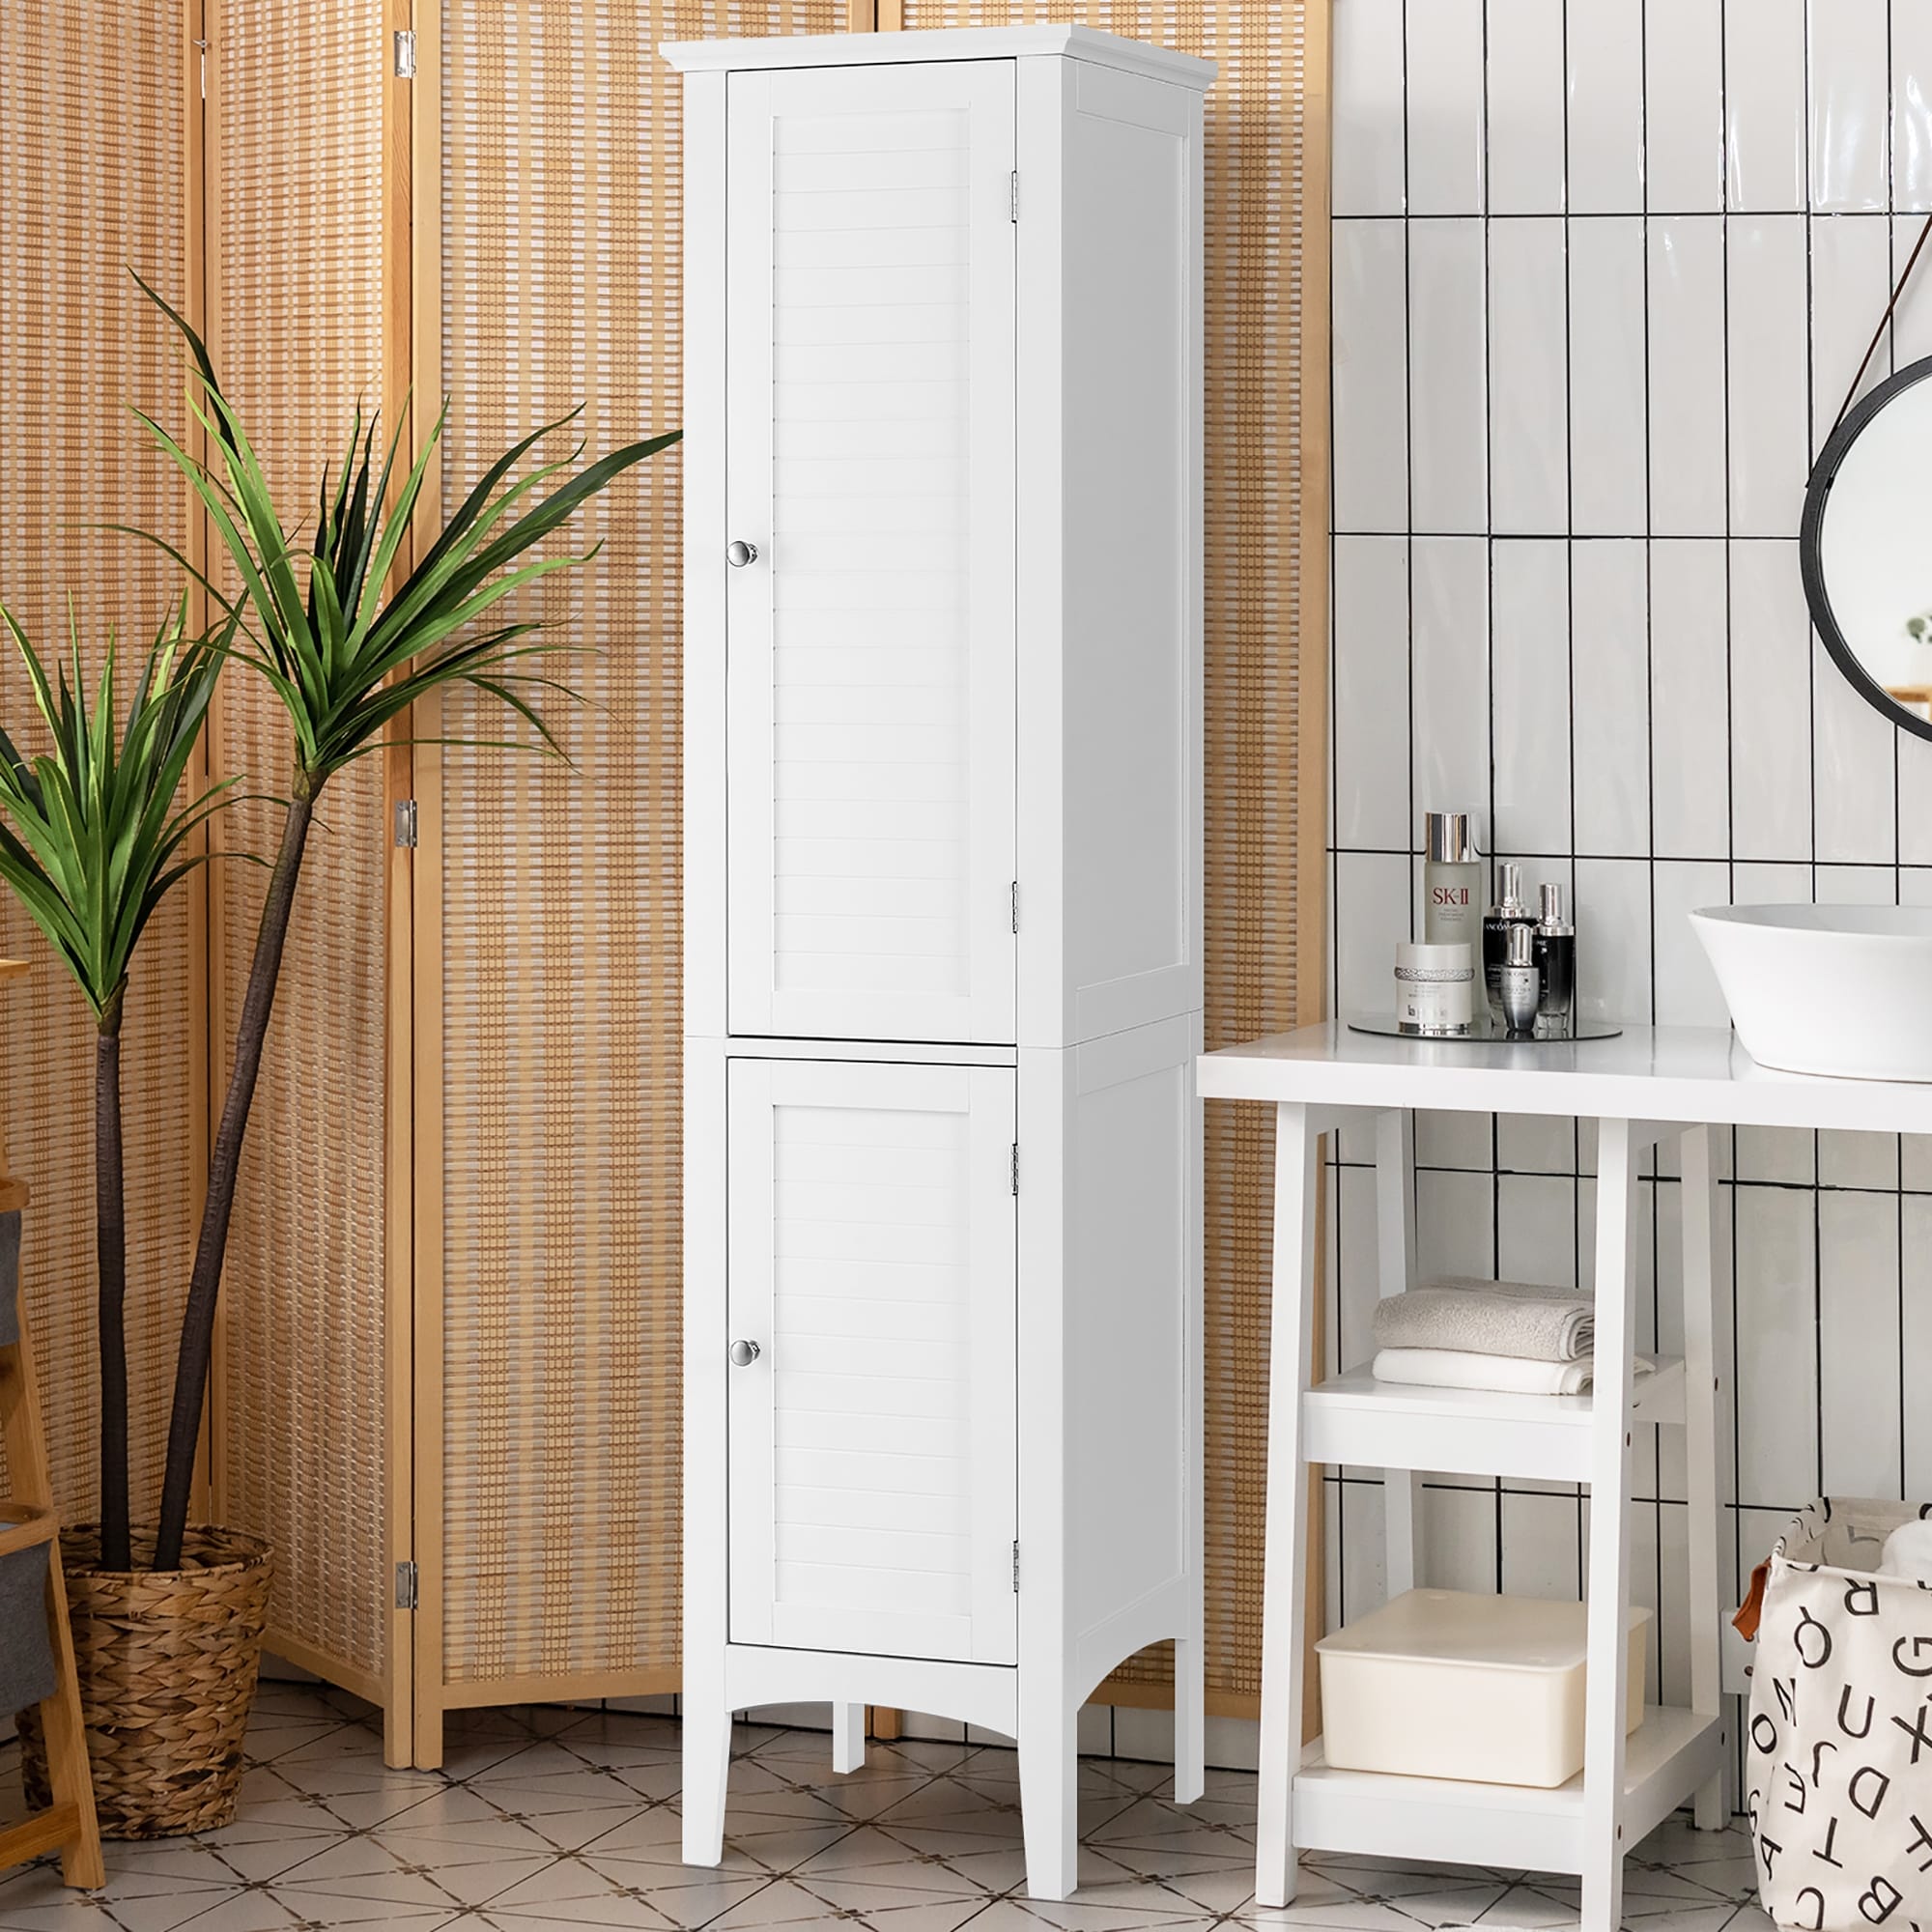 Homall Wooden Bathroom Cabinet, Freestanding Storage Cabinet with 4 Drawers  and 1 Cupboard, Side Storage Organizer Cabinet for Bathroom, Entryway, Home  and Kitchen (White) 